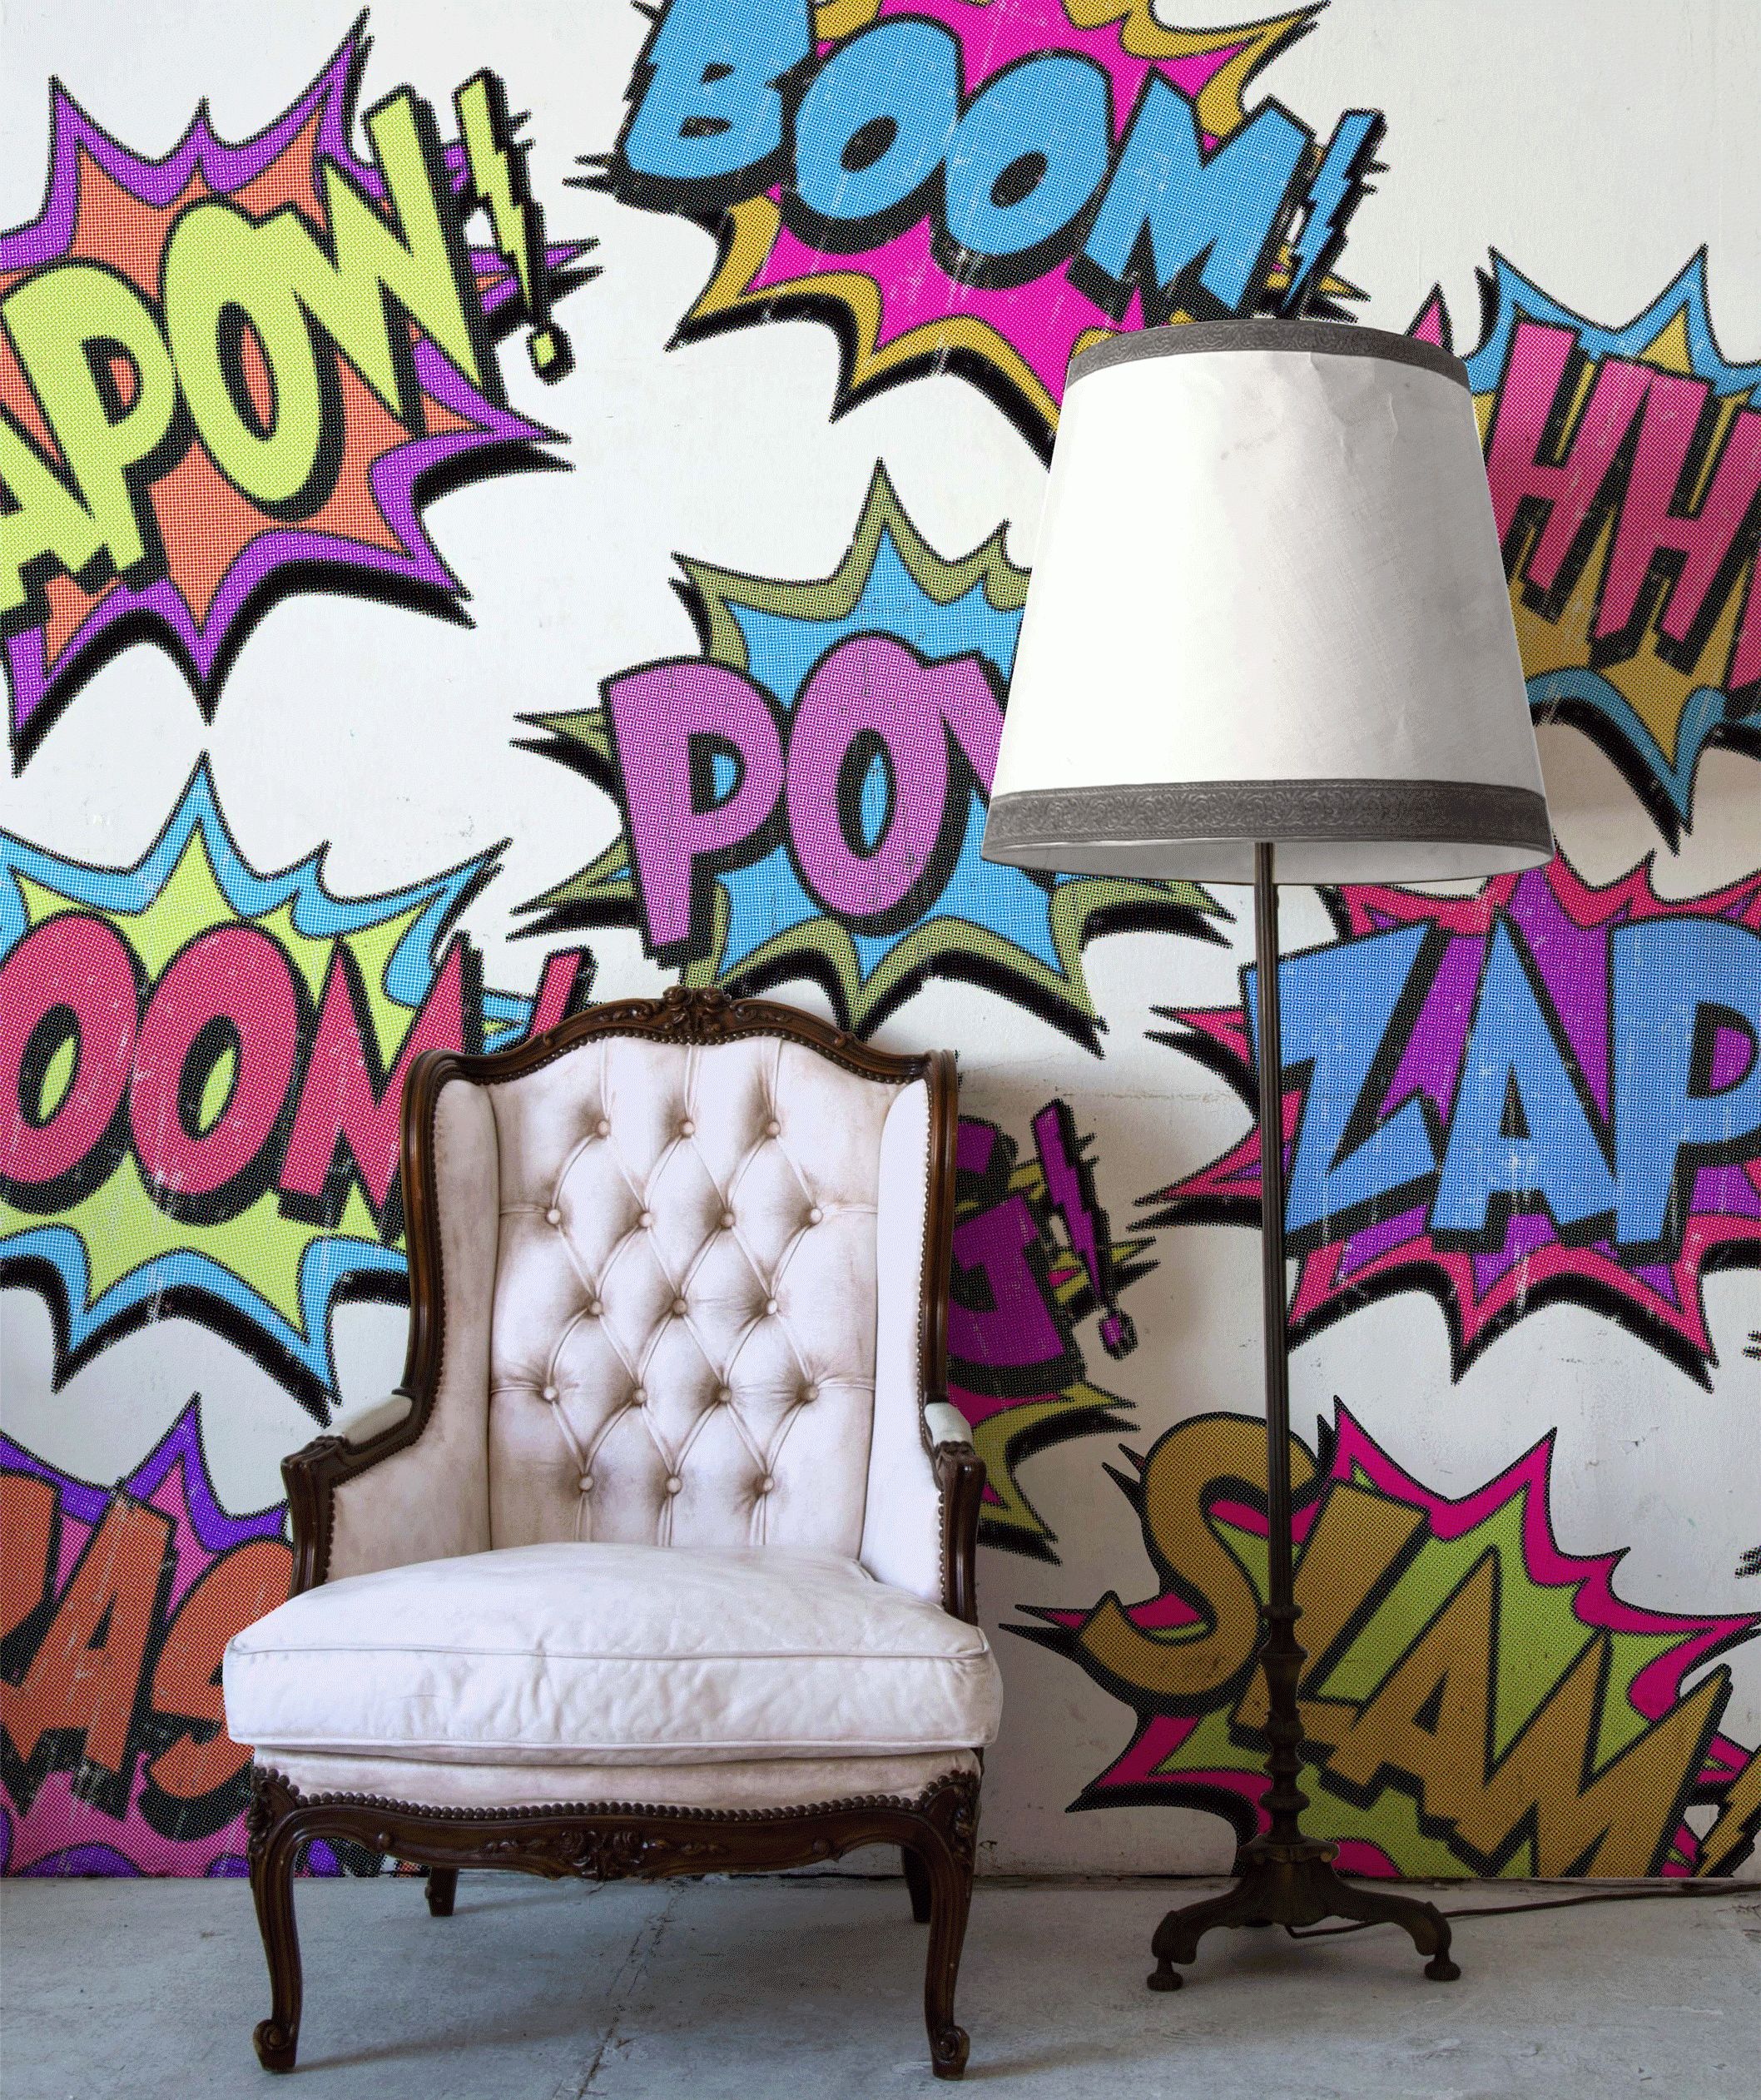 Art: Pop Art Wall Mural Within Most Up To Date Pop Art Wallpaper For Walls (View 1 of 20)